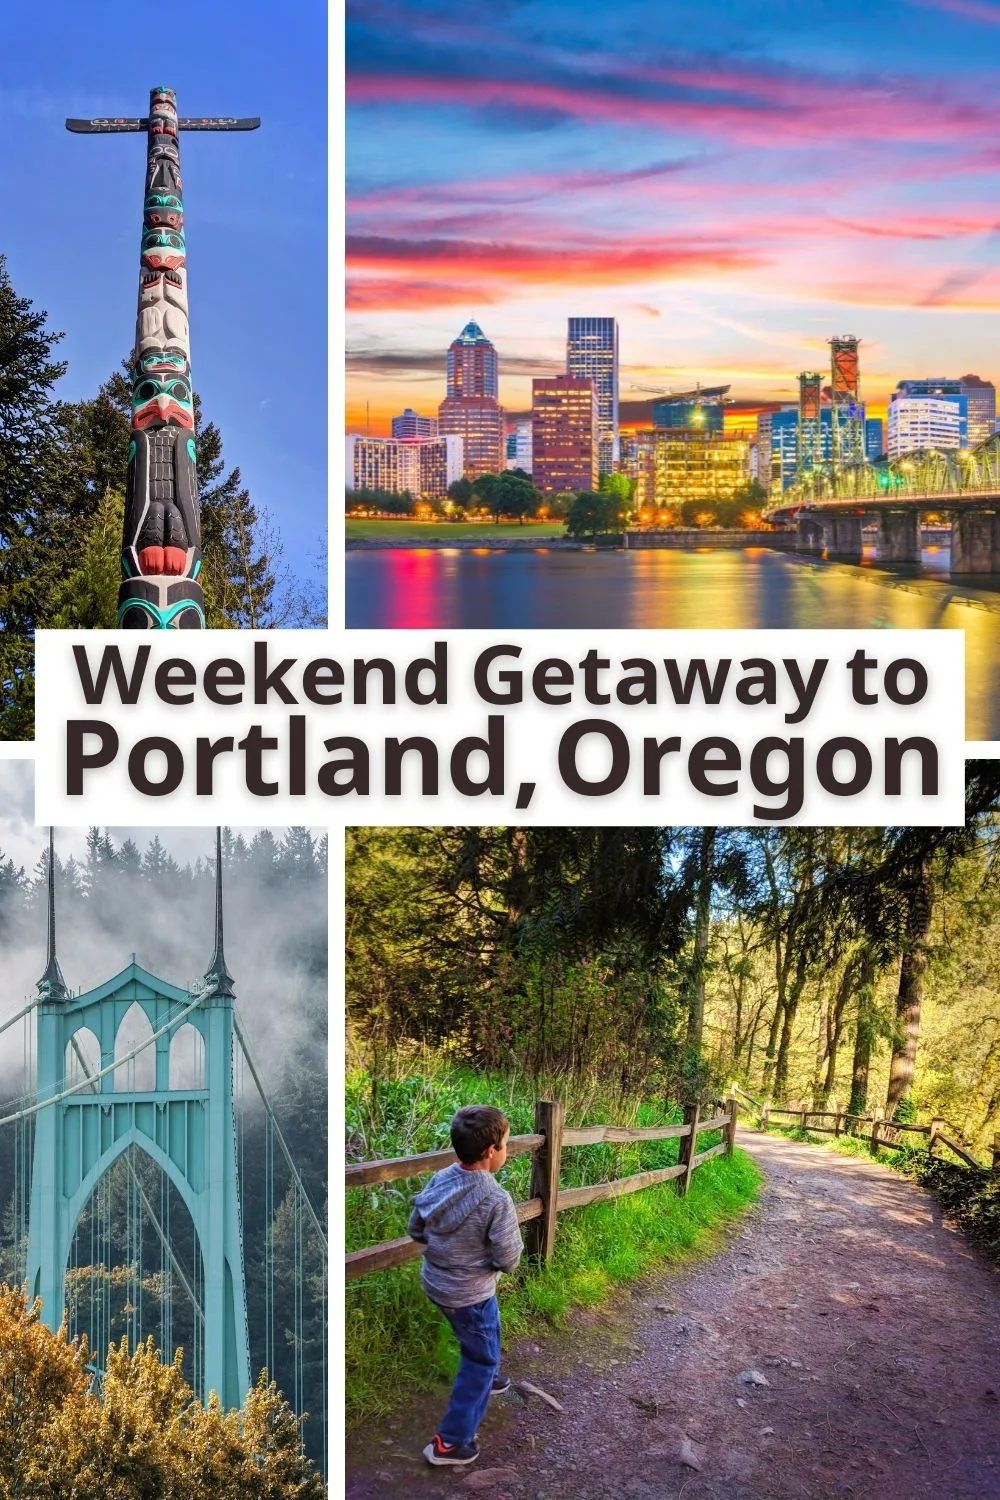 A Portland weekend getaway is easy to plan with tons of things to do in summer or on a rainy day. Wine country, city parks and gardens, museums and for for a great trip to Portland, Oregon.